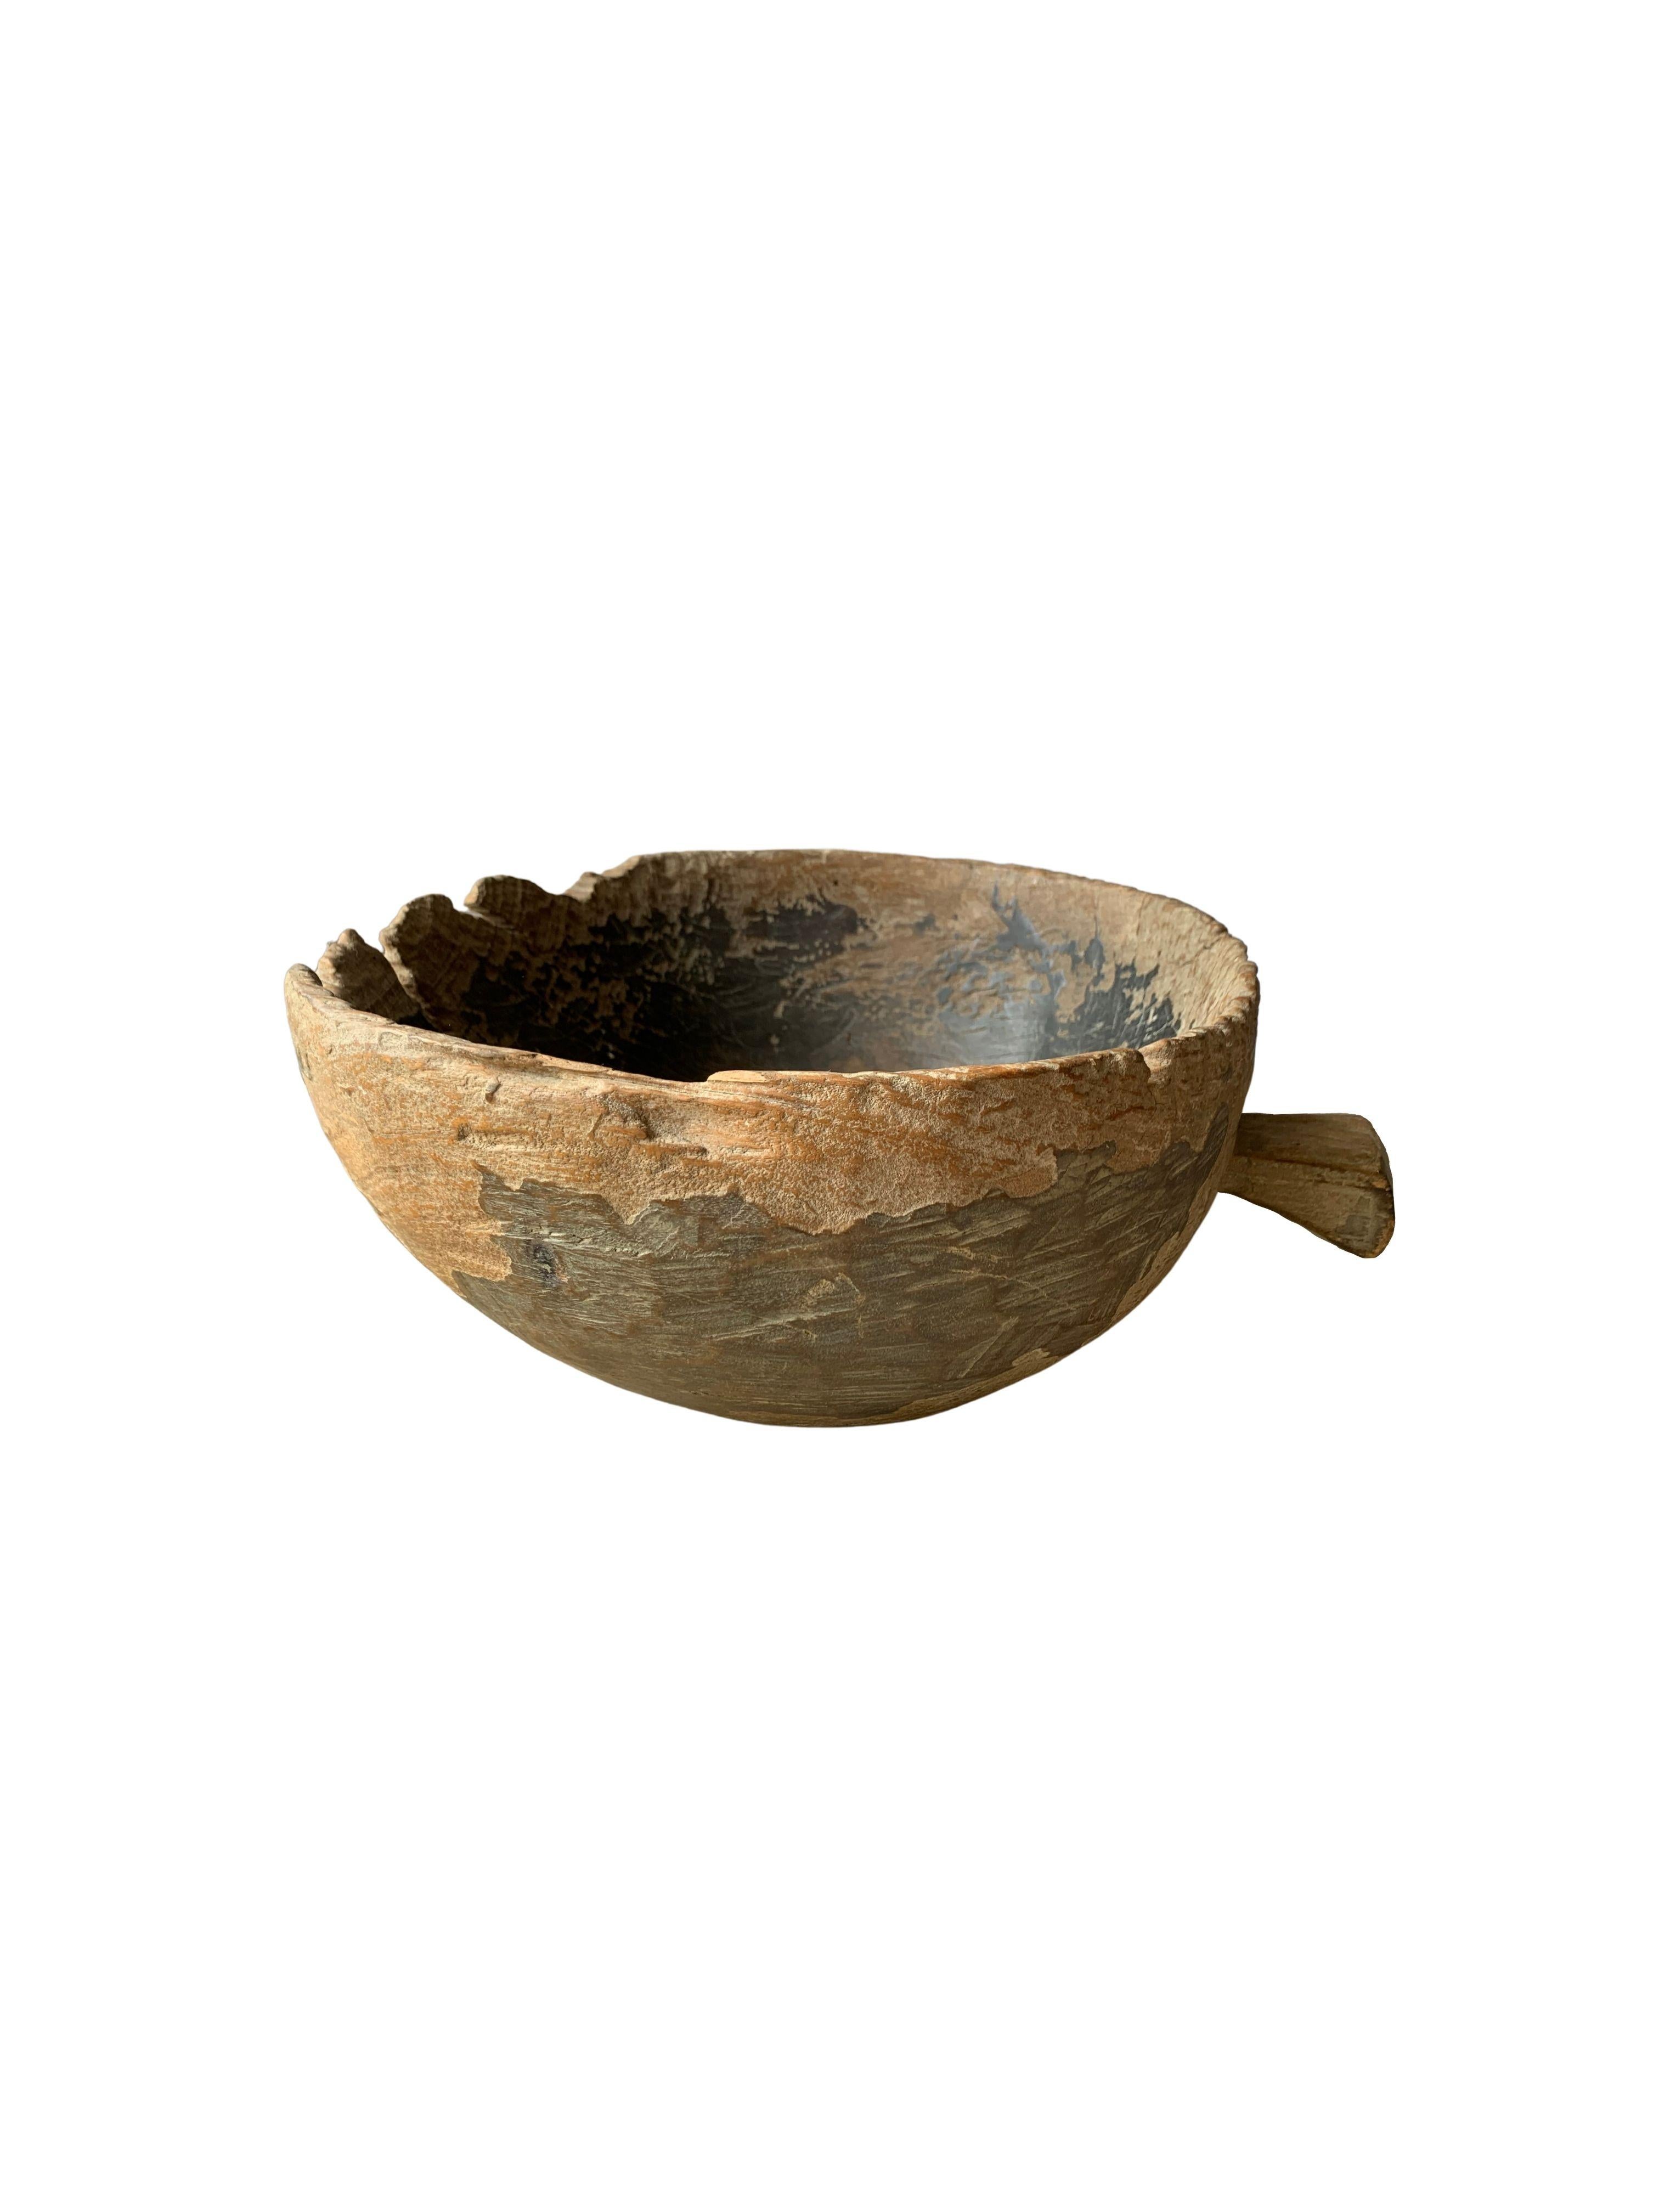 A teak burl wood bowl crafted on the island of Java, Indonesia. The bowl was cut from a much larger slab of burl wood and maintains an organic shape and natural texture. It has aged considerably over the decades contributing to its appeal. 

